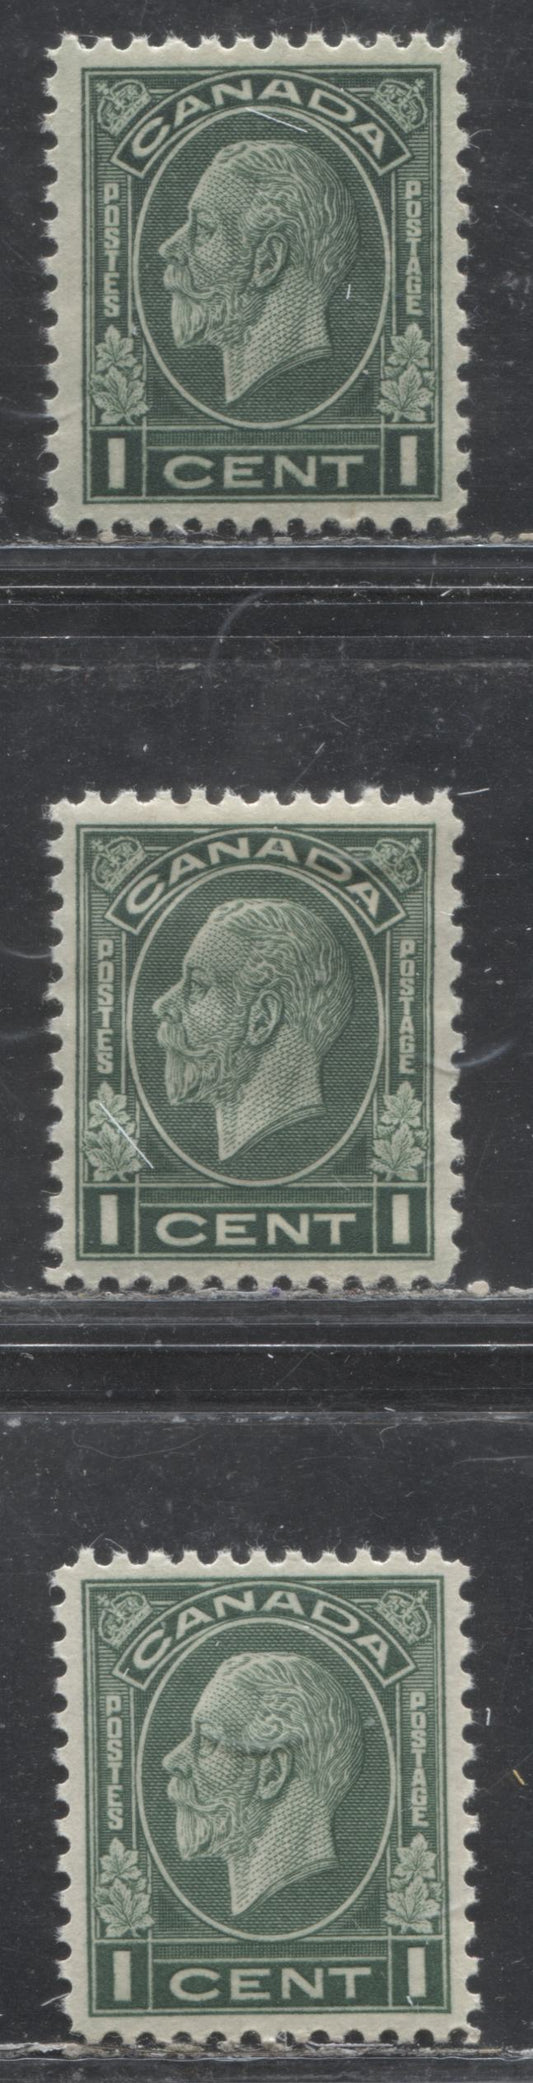 Lot 290 Canada #195-d 1c Dark Green King George V, 1932 Medallion Issue, 3 VFNH Singles, Rotary Press Wet & Dry Printings, 2 Shades of the Wet Printing